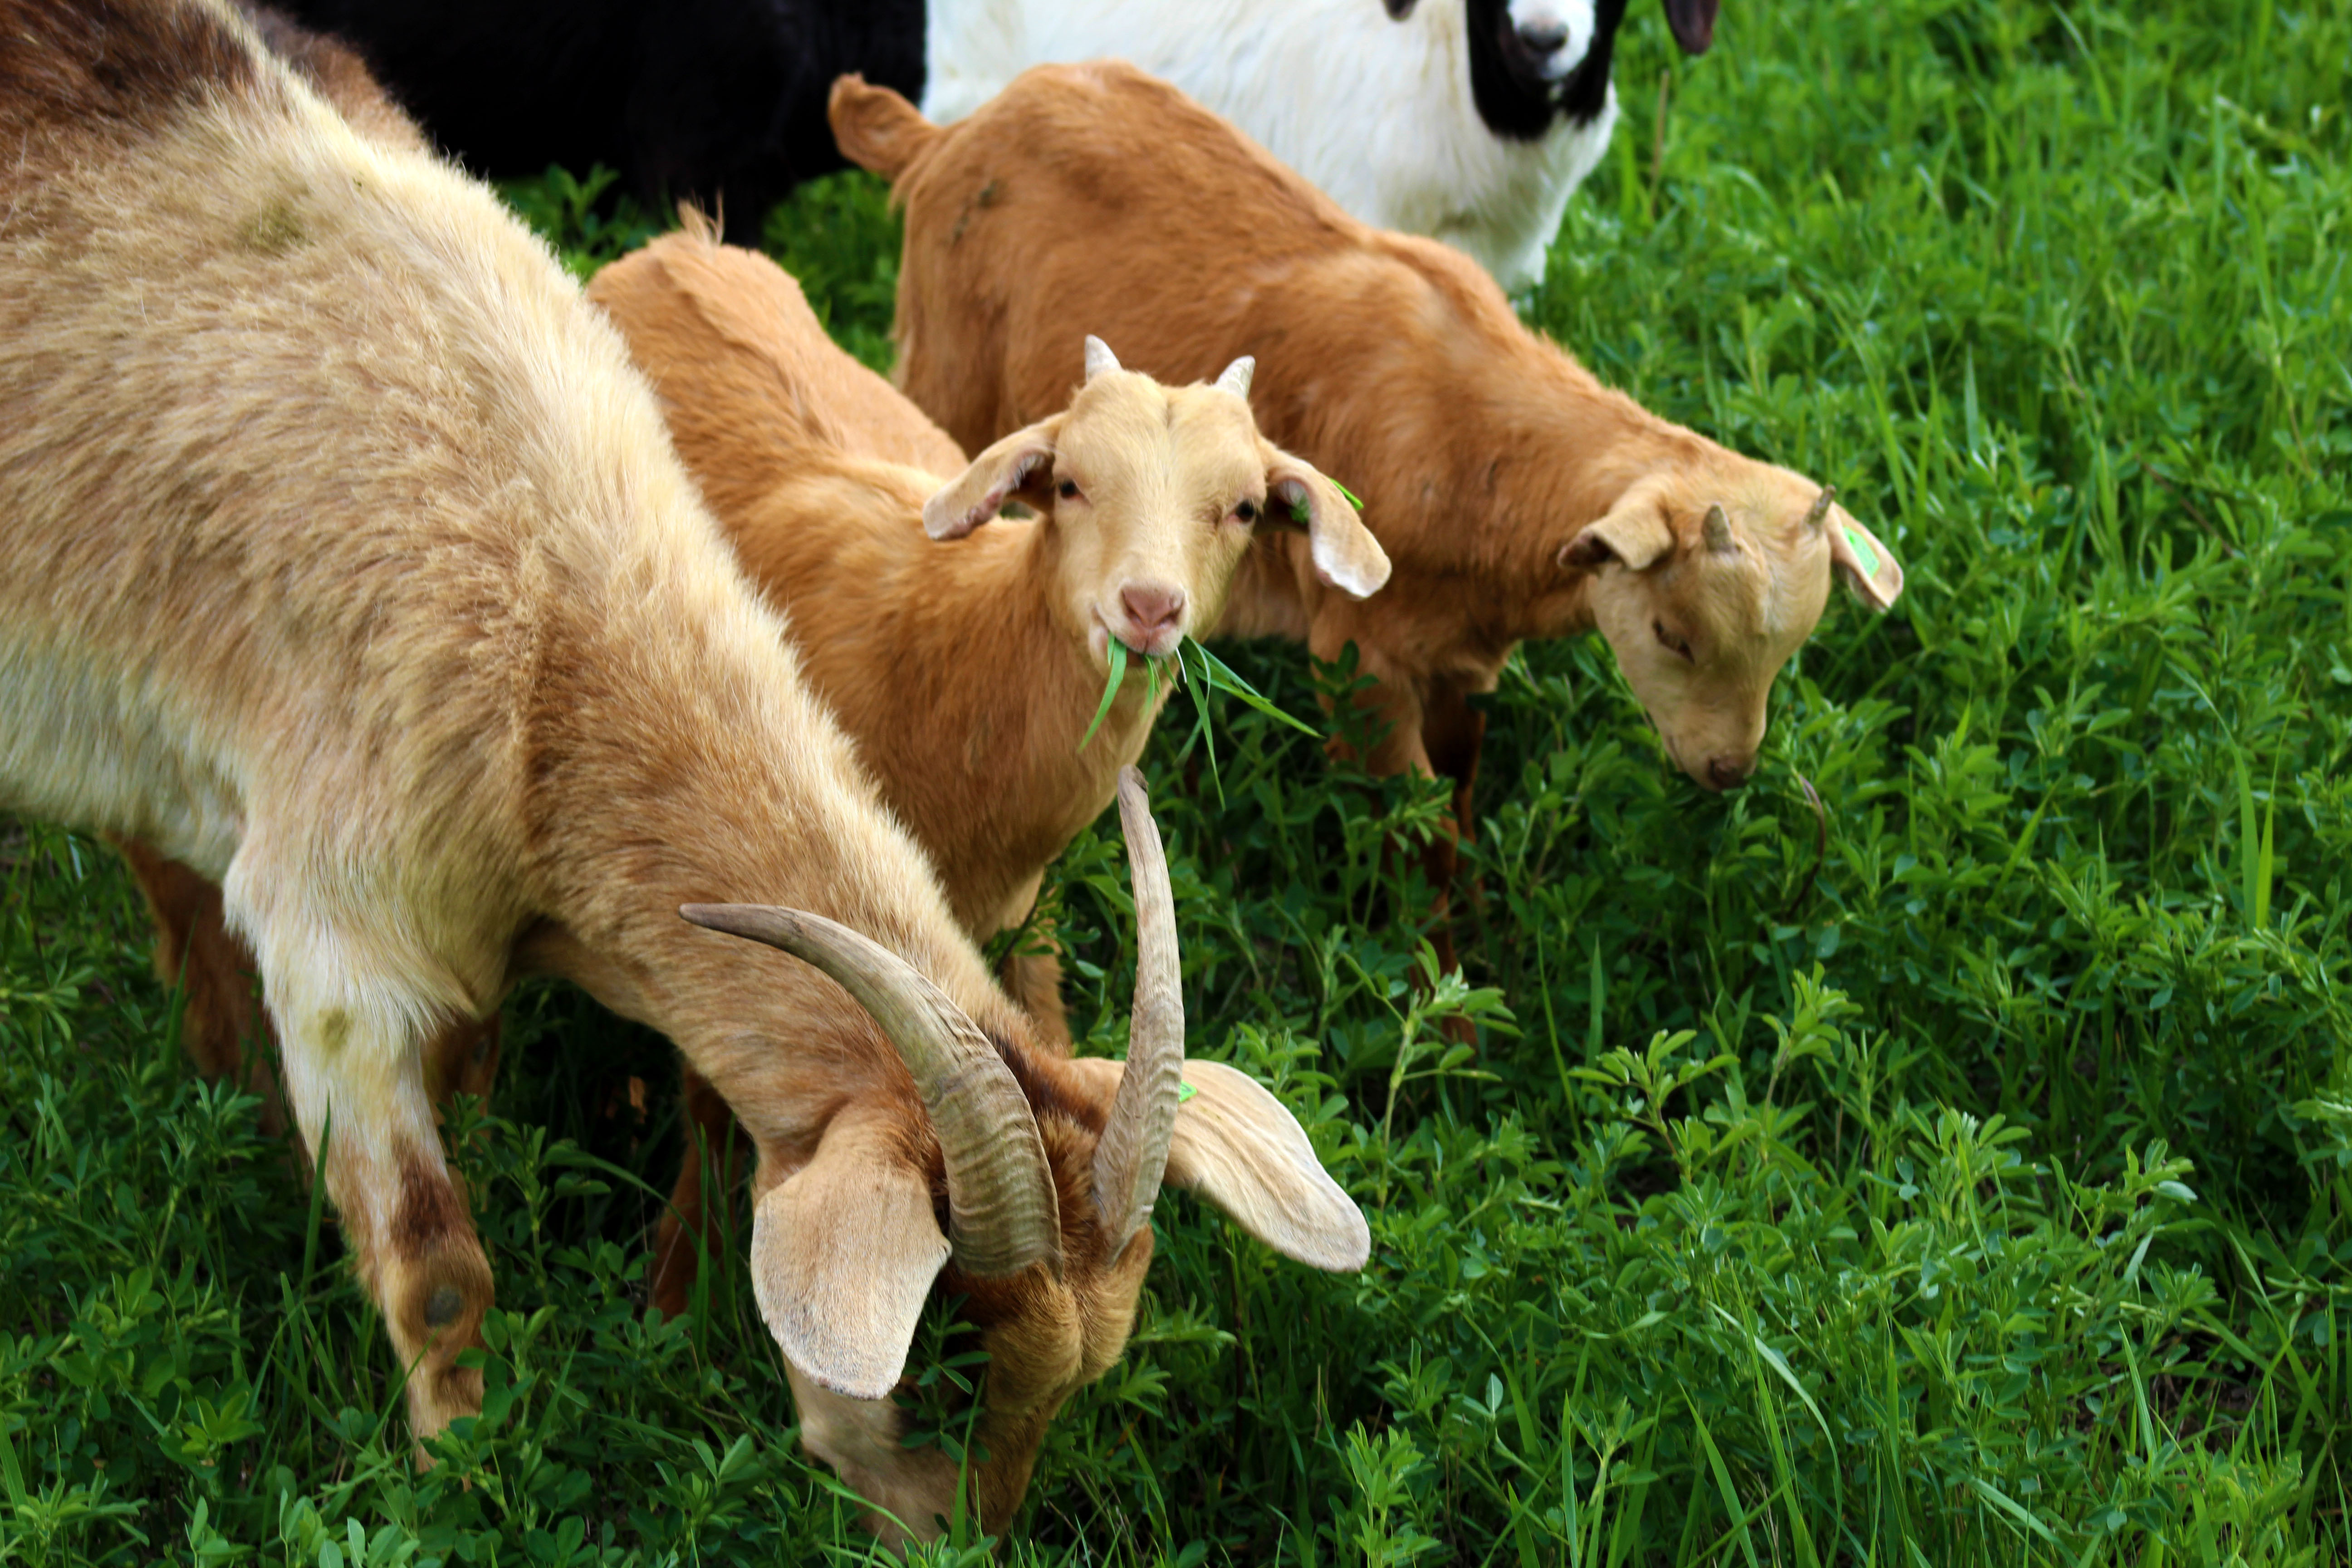 An image of a 3 goats in focus, with the one in the middle looking up with grass/weeds in their mouth.